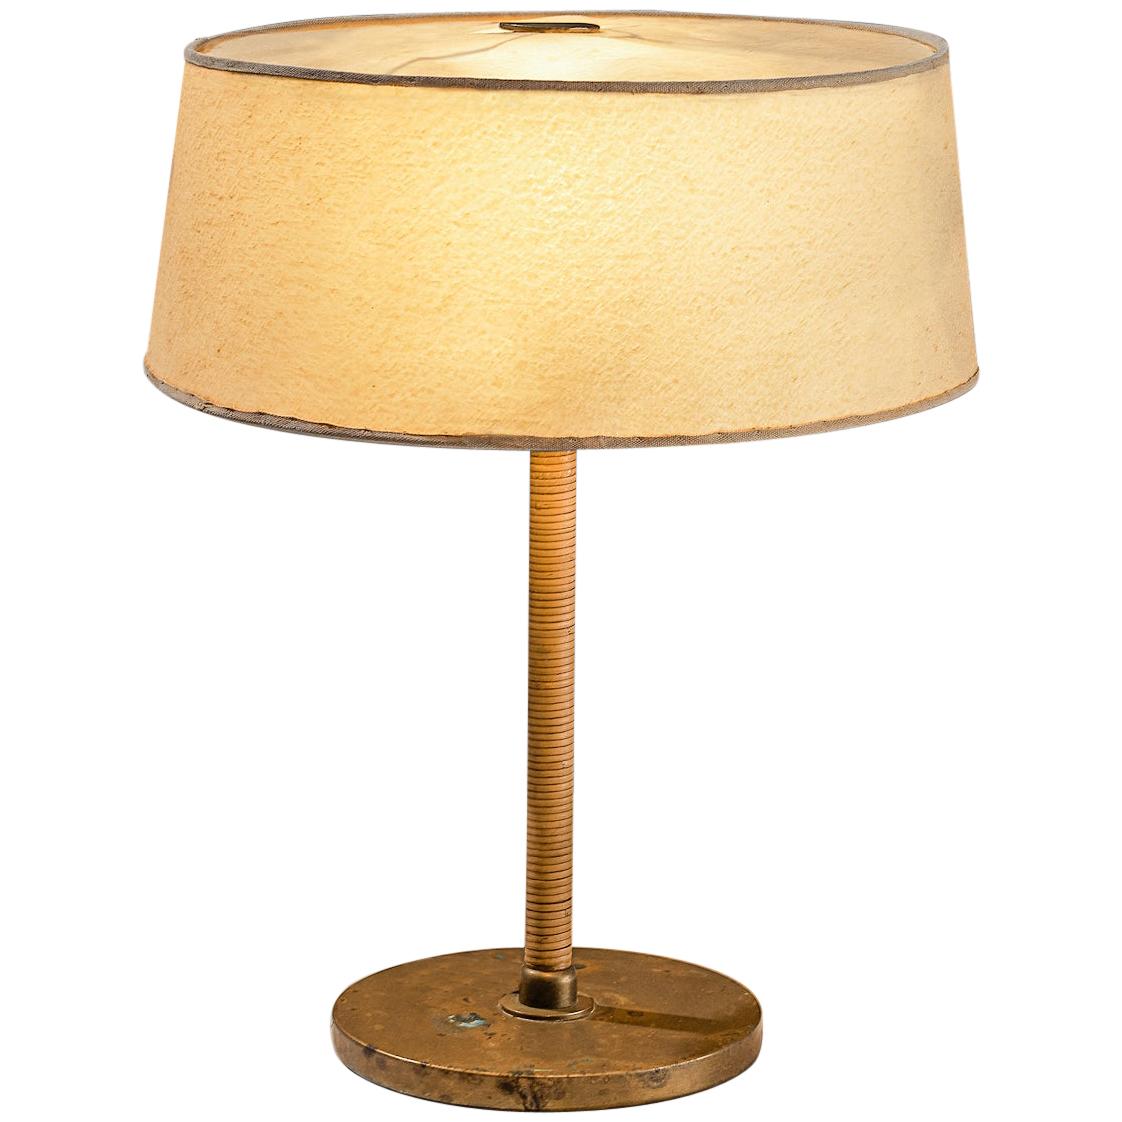 Early Paavo Tynell for Taito Table Lamp